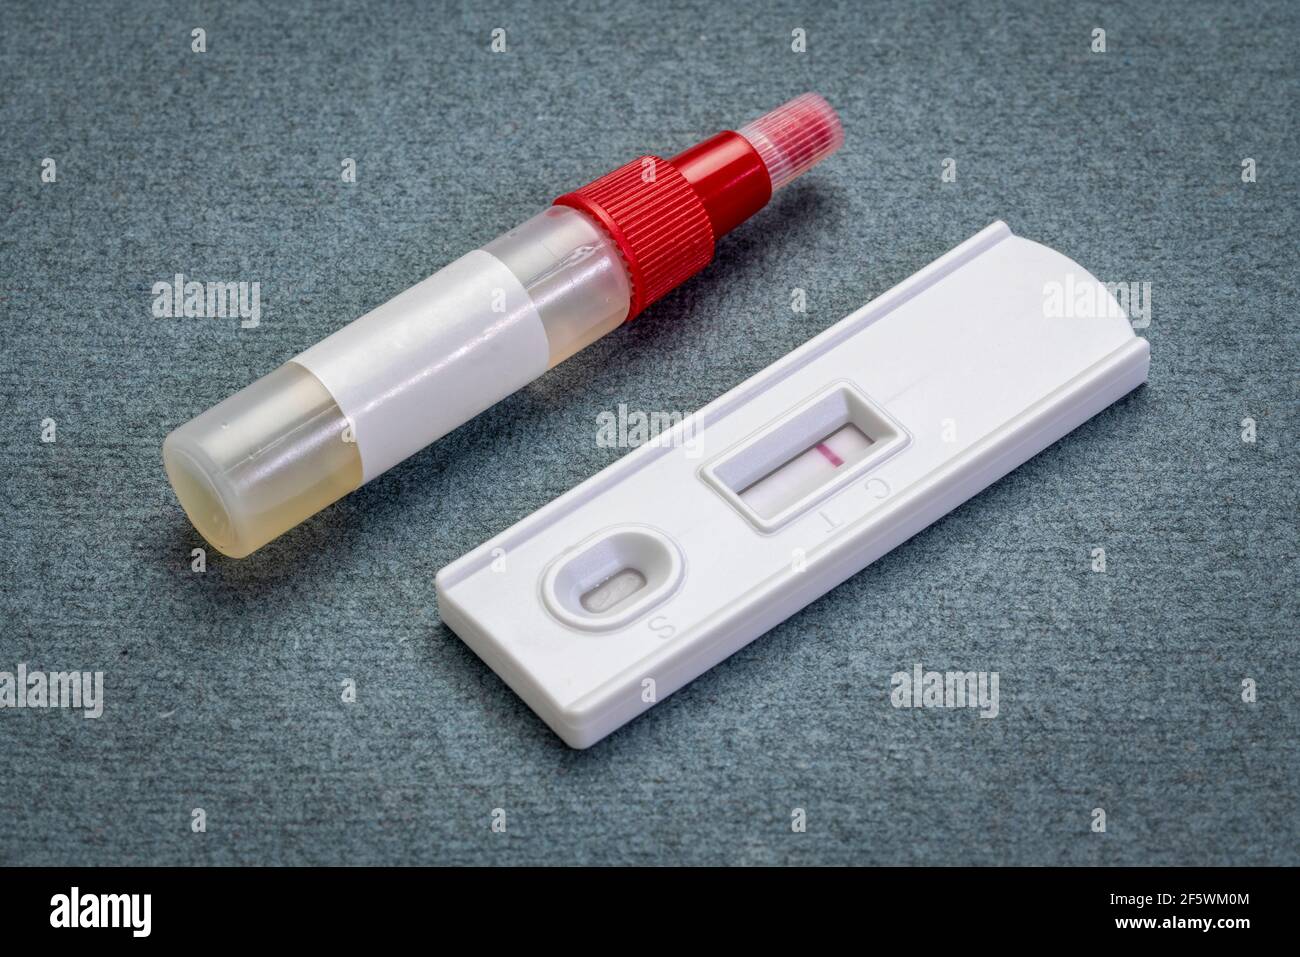 fecal immunochemical test for  colorectal diseases - home kit with a collecting tube and a negative result on a test cassette, health and self care co Stock Photo